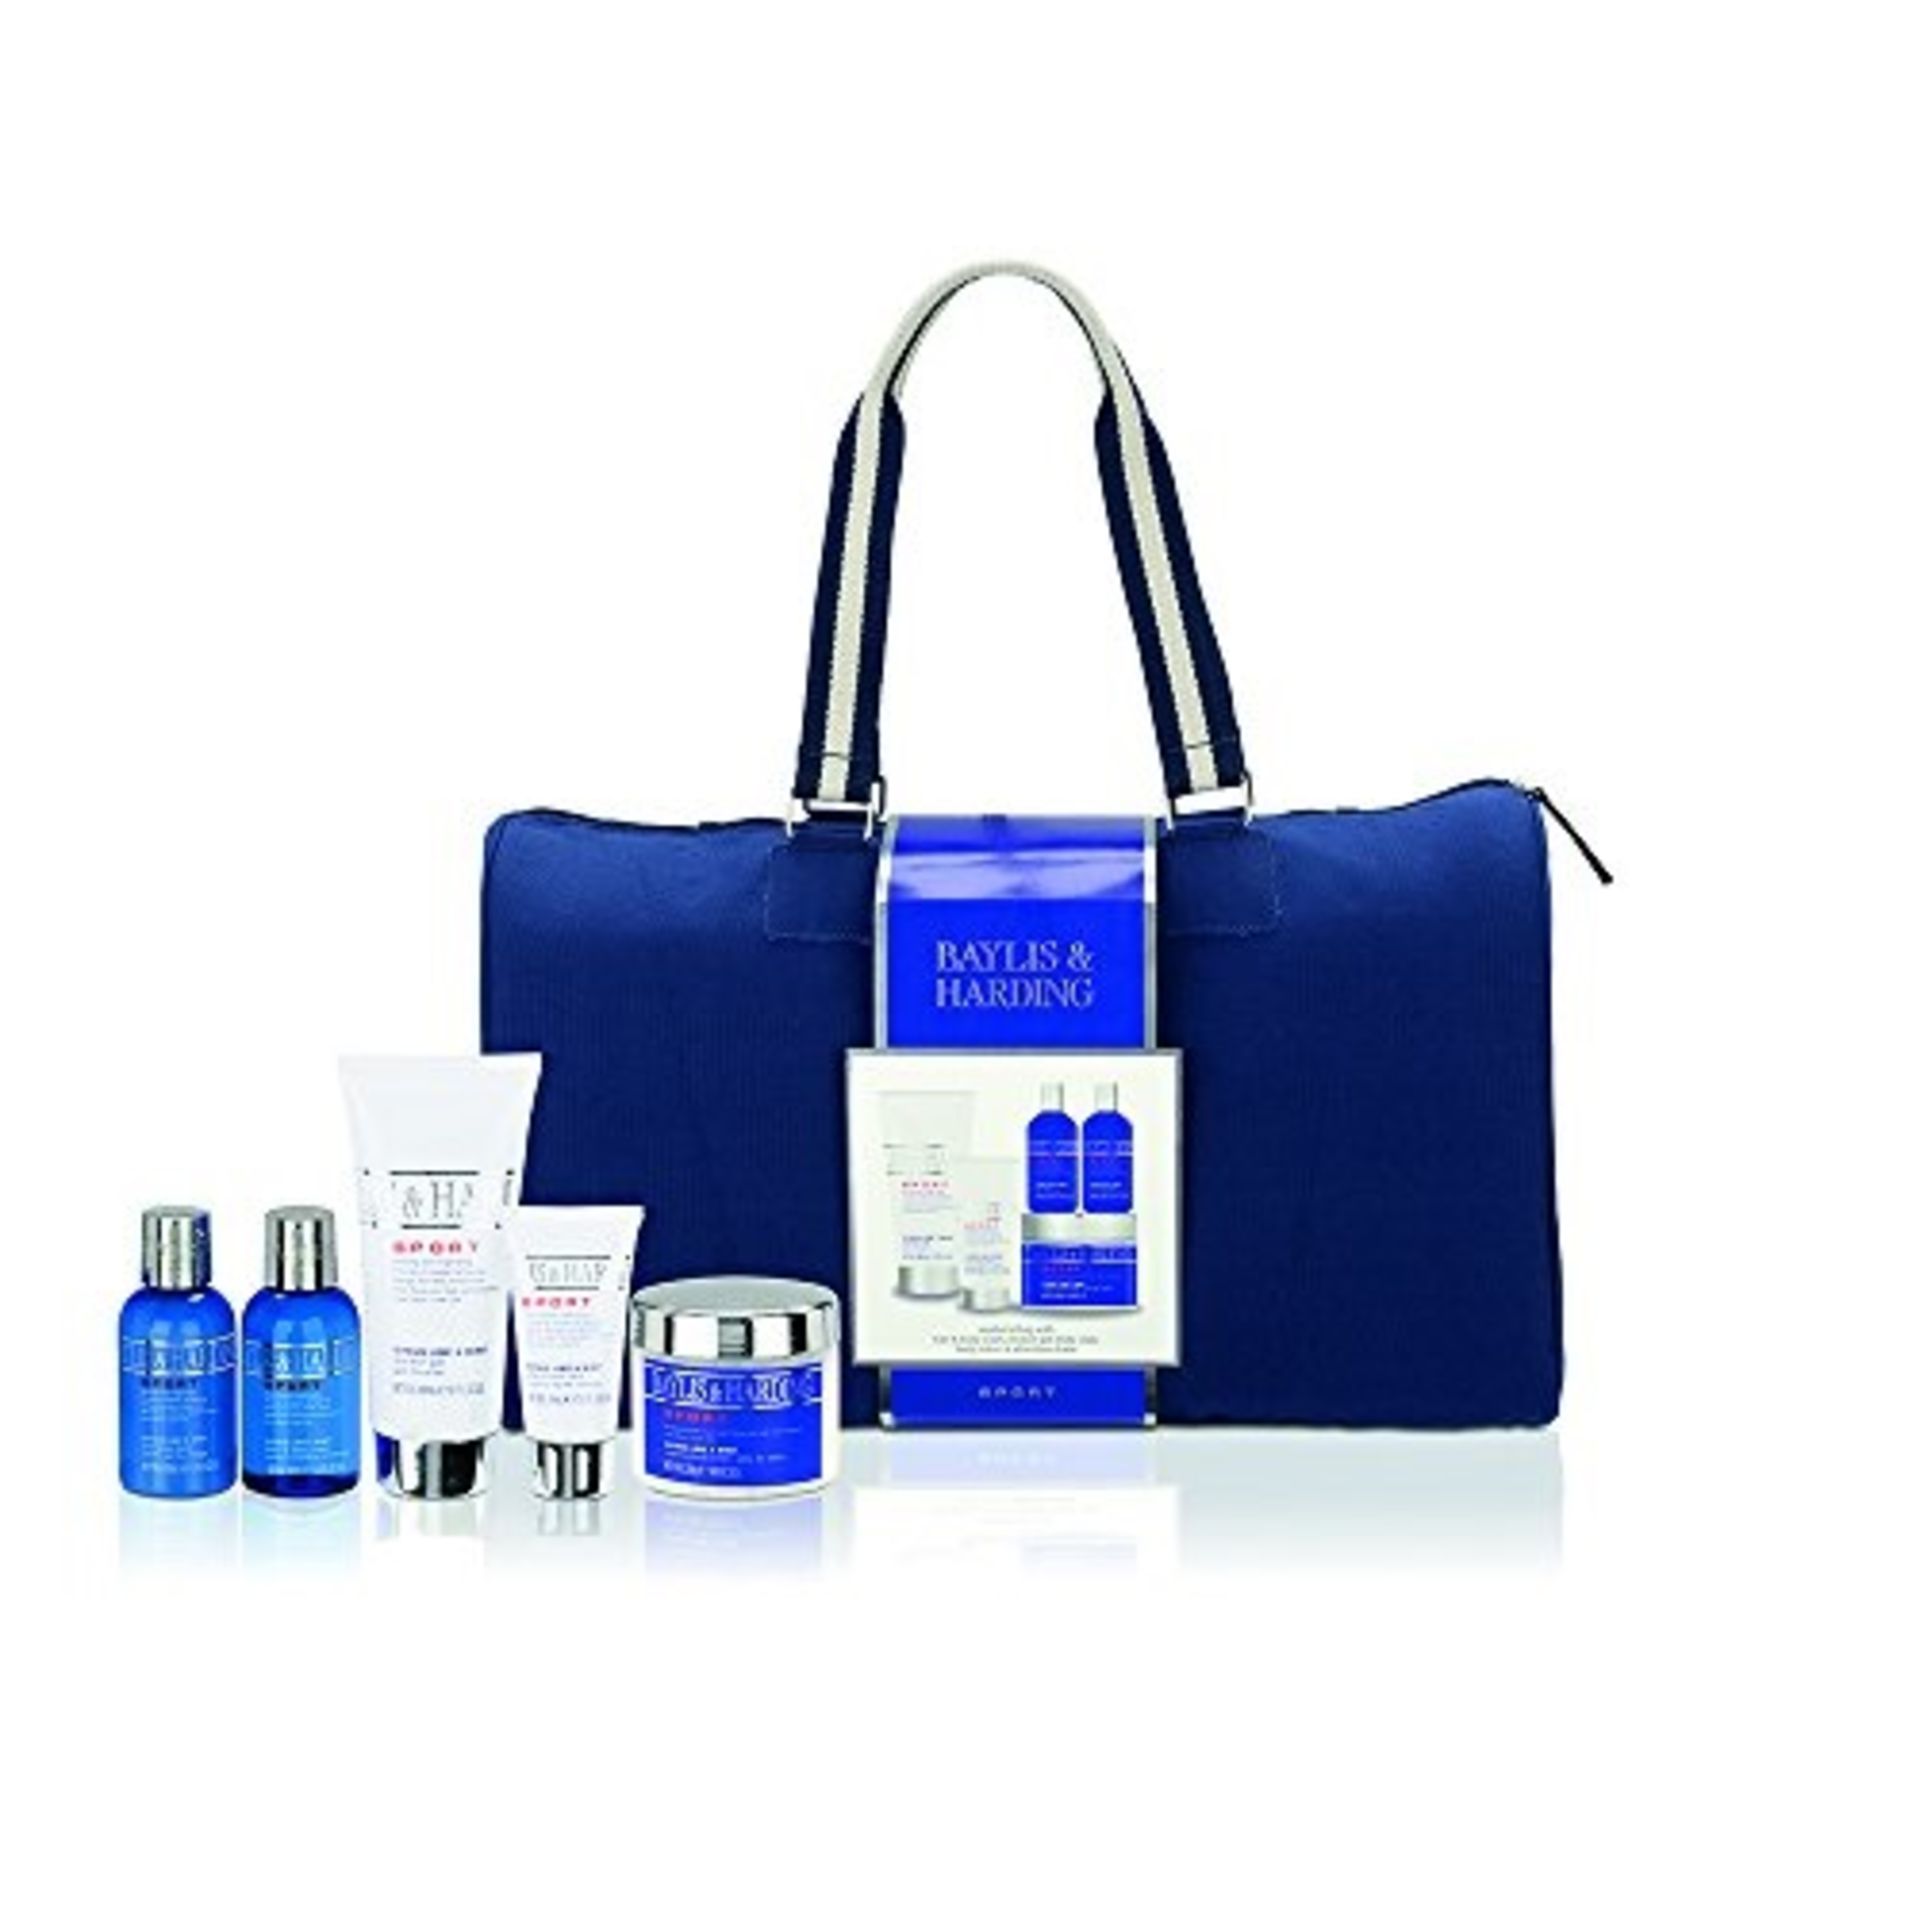 V Brand New Baylis & Harding Men's Citrus Lime And Mint Bag With Six Piece Gift Set Including Body